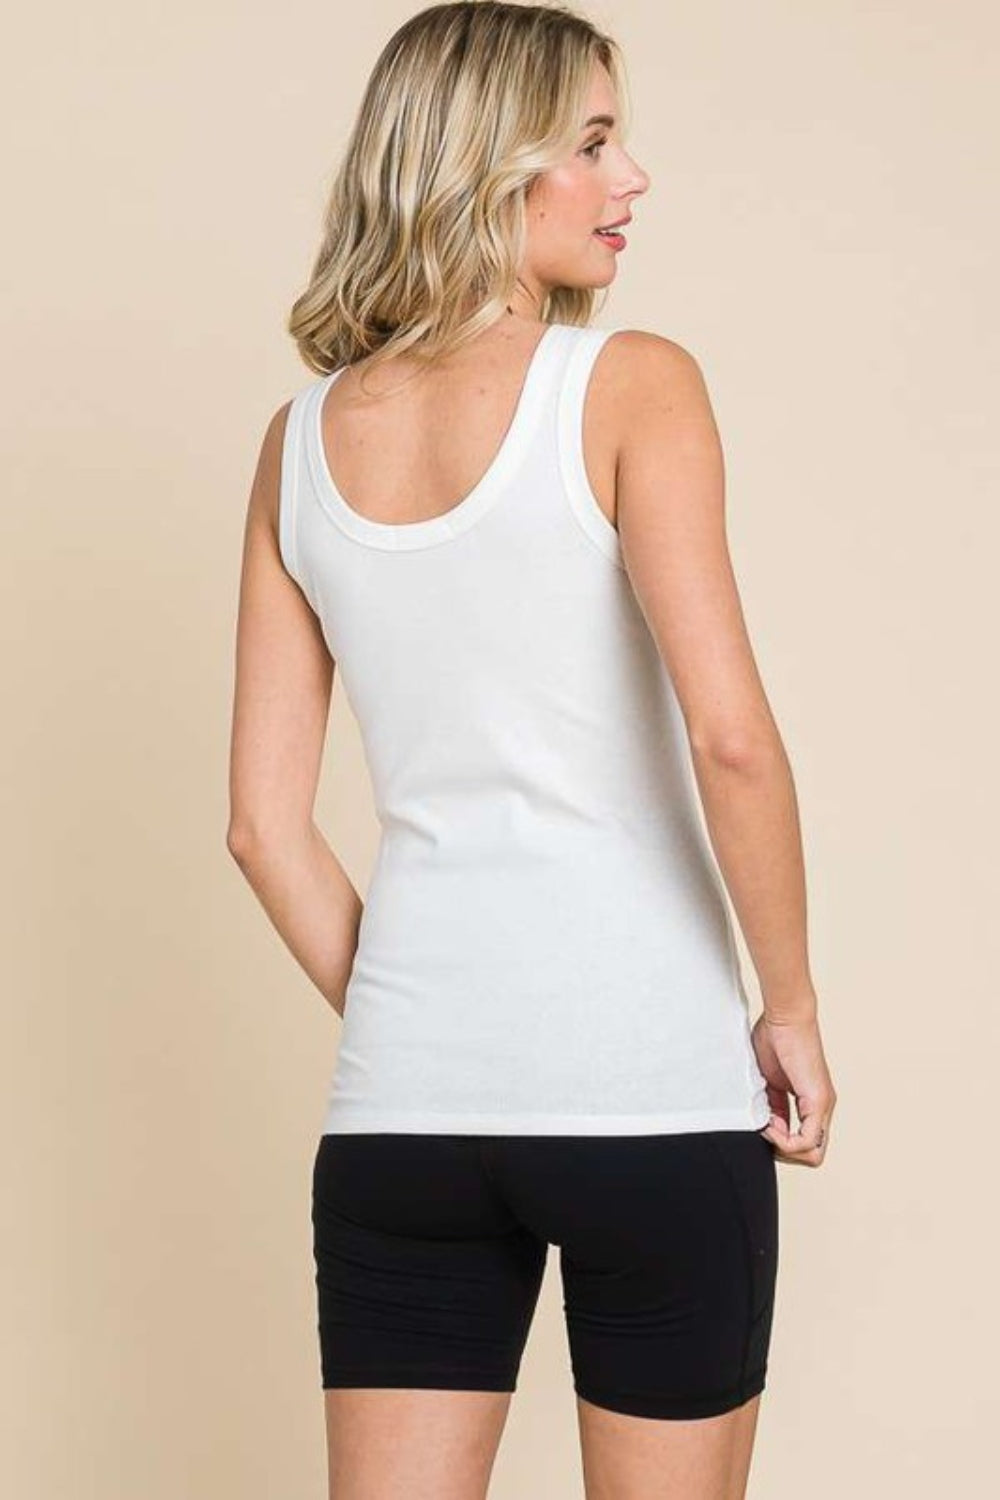 The Ribbed Scoop Neck Tank is a timeless and versatile piece that is a must-have in any wardrobe. Its classic design features a flattering scoop neckline and a ribbed texture, adding a stylish touch to any outfit. This tank top is perfect for layering under cardigans or jackets, or wearing on its own during warmer weather. S-3X